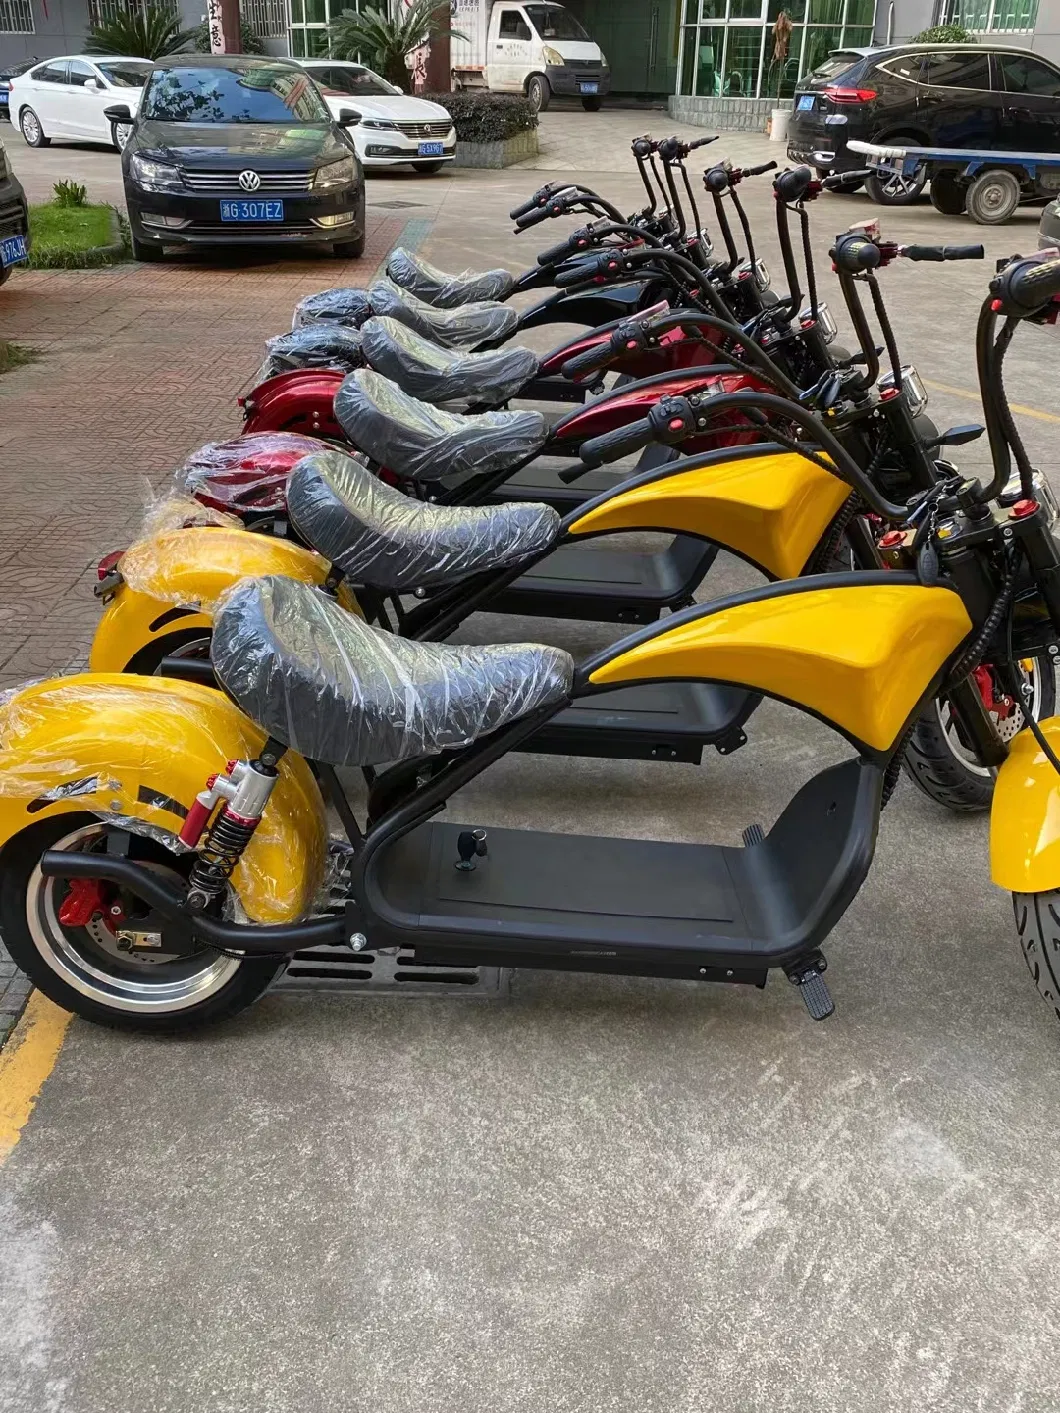 New Adult Fashionable Electric Scooter for Sale Two Wheeled Motorcycle 1500W Rated Motor